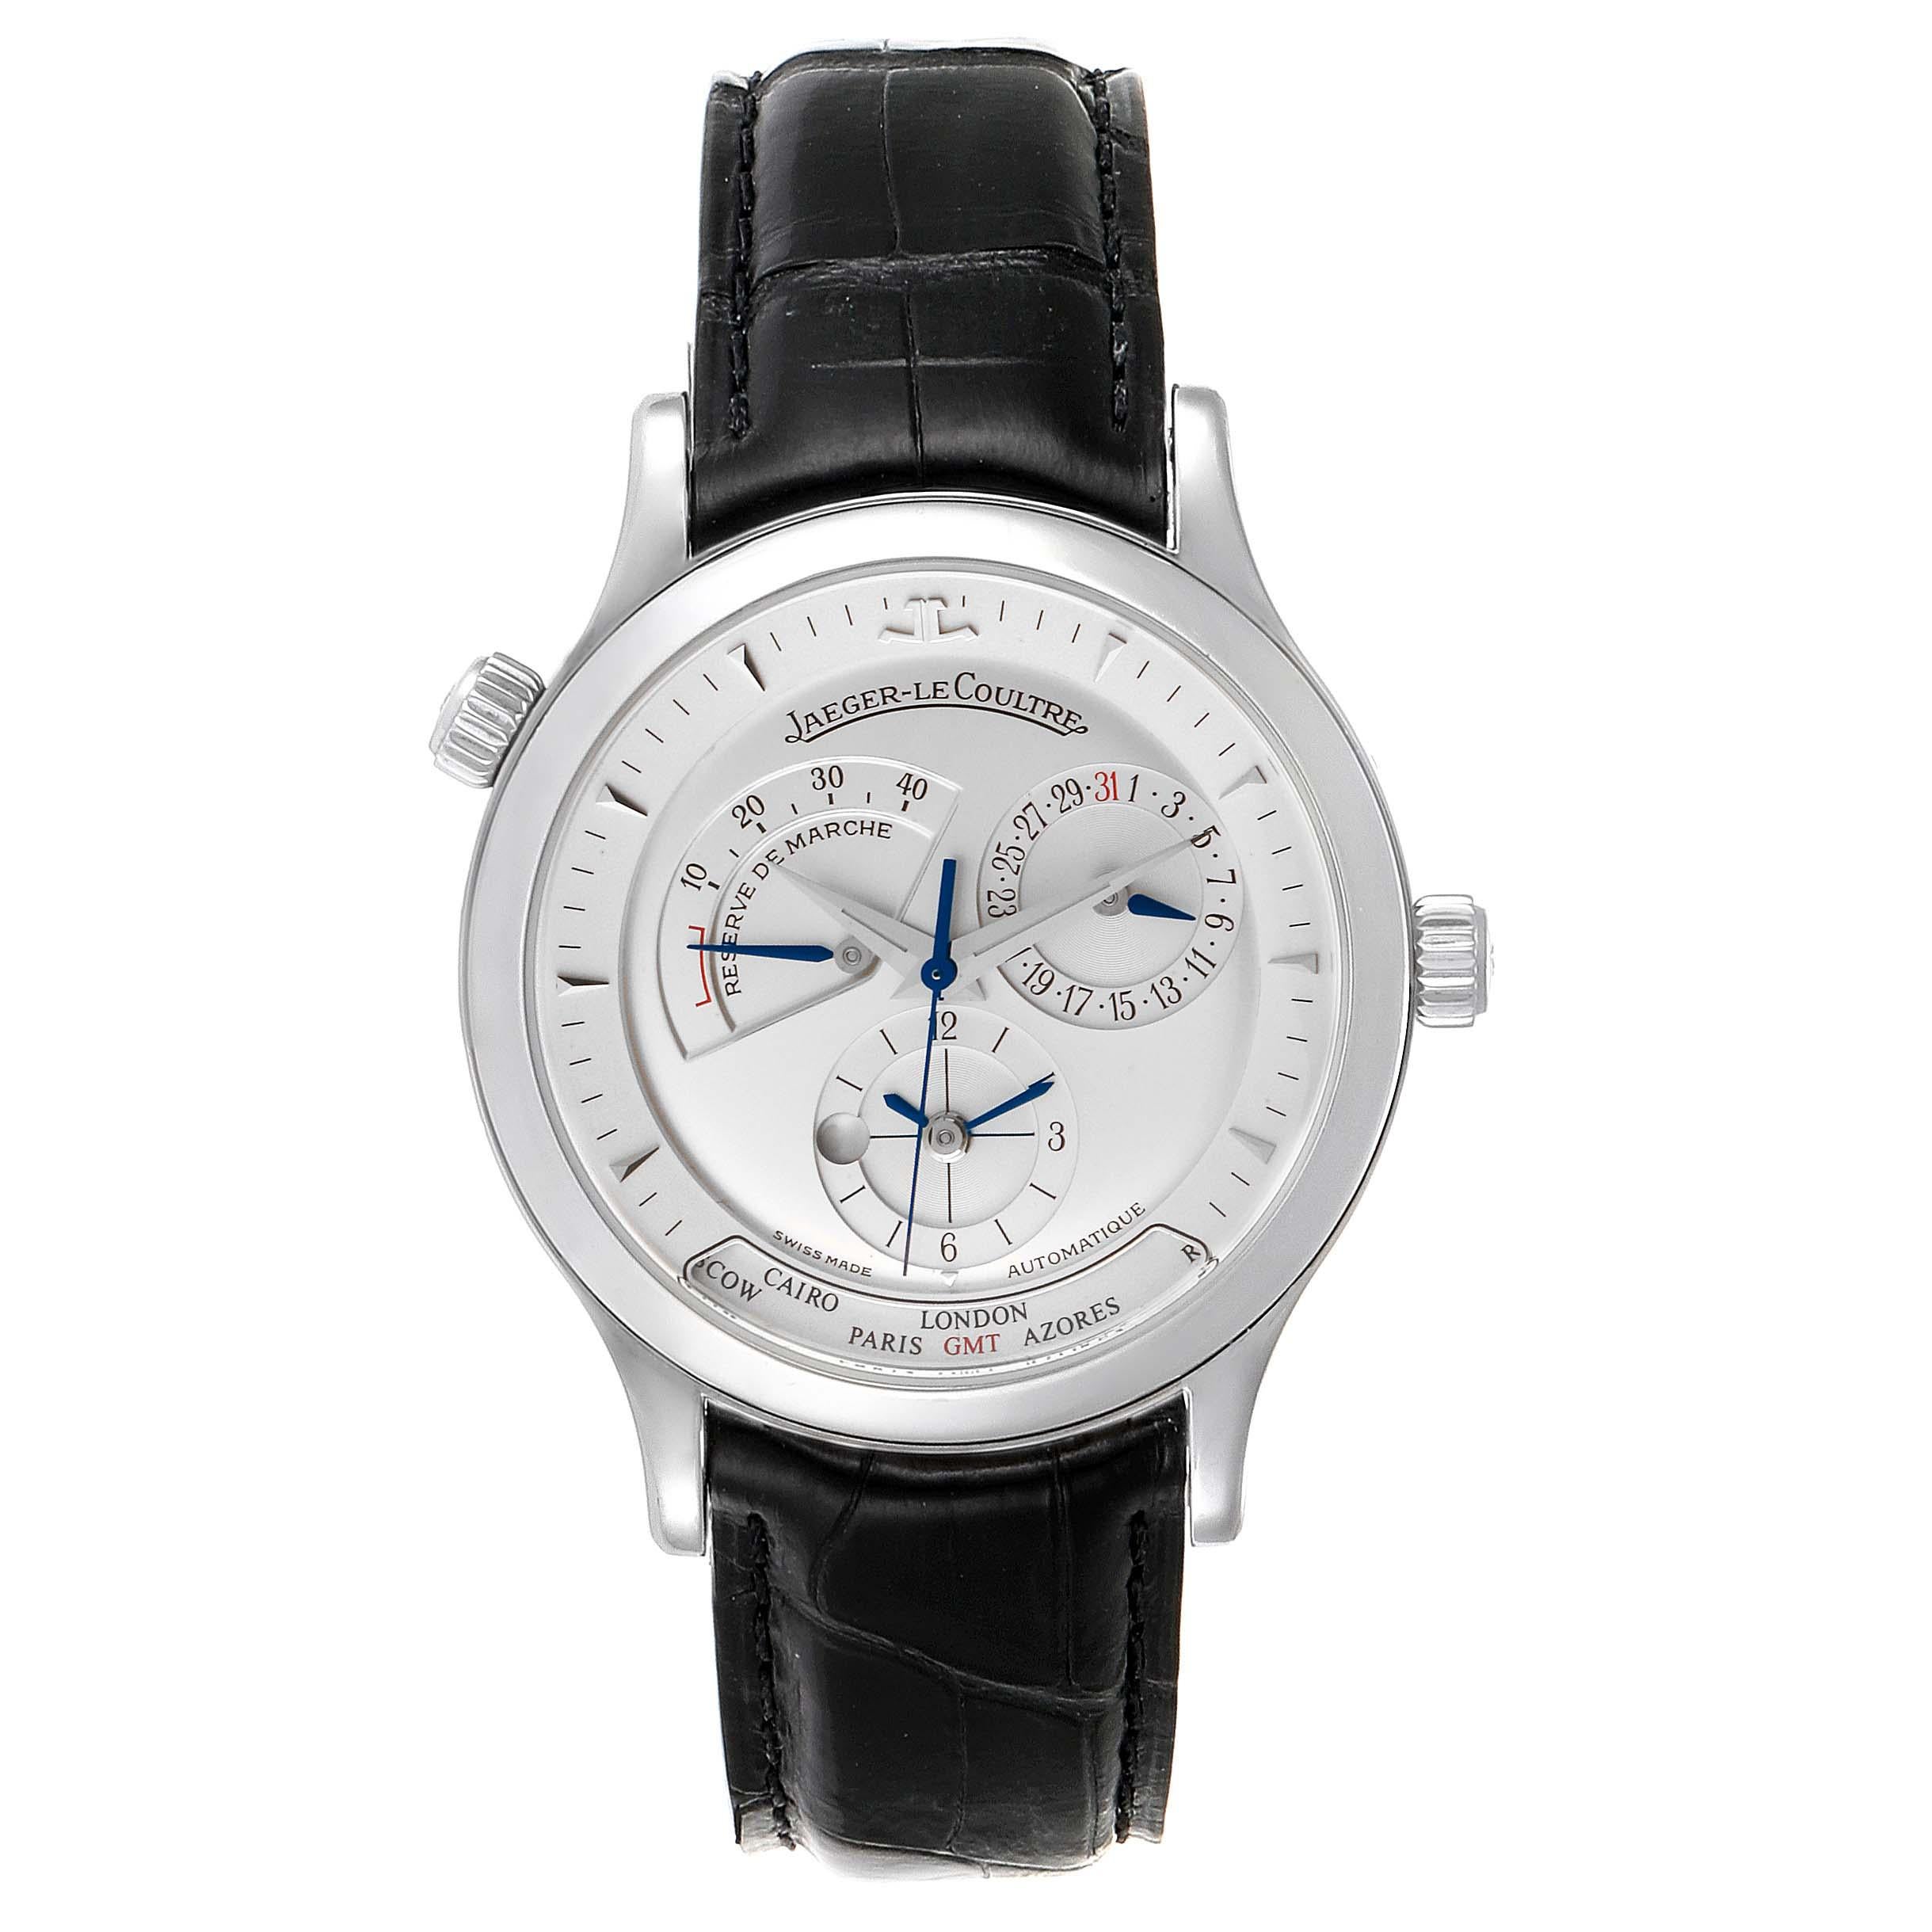 Jaeger Lecoultre Master Geographic Watch 142.8.92.S Q1428420 Box Papers. Self-winding automatic movement. Stainless steel case 39.0 mm in diameter. Switching between the 24 city locations is via the crown at the 10 o'clock position. Stainless steel